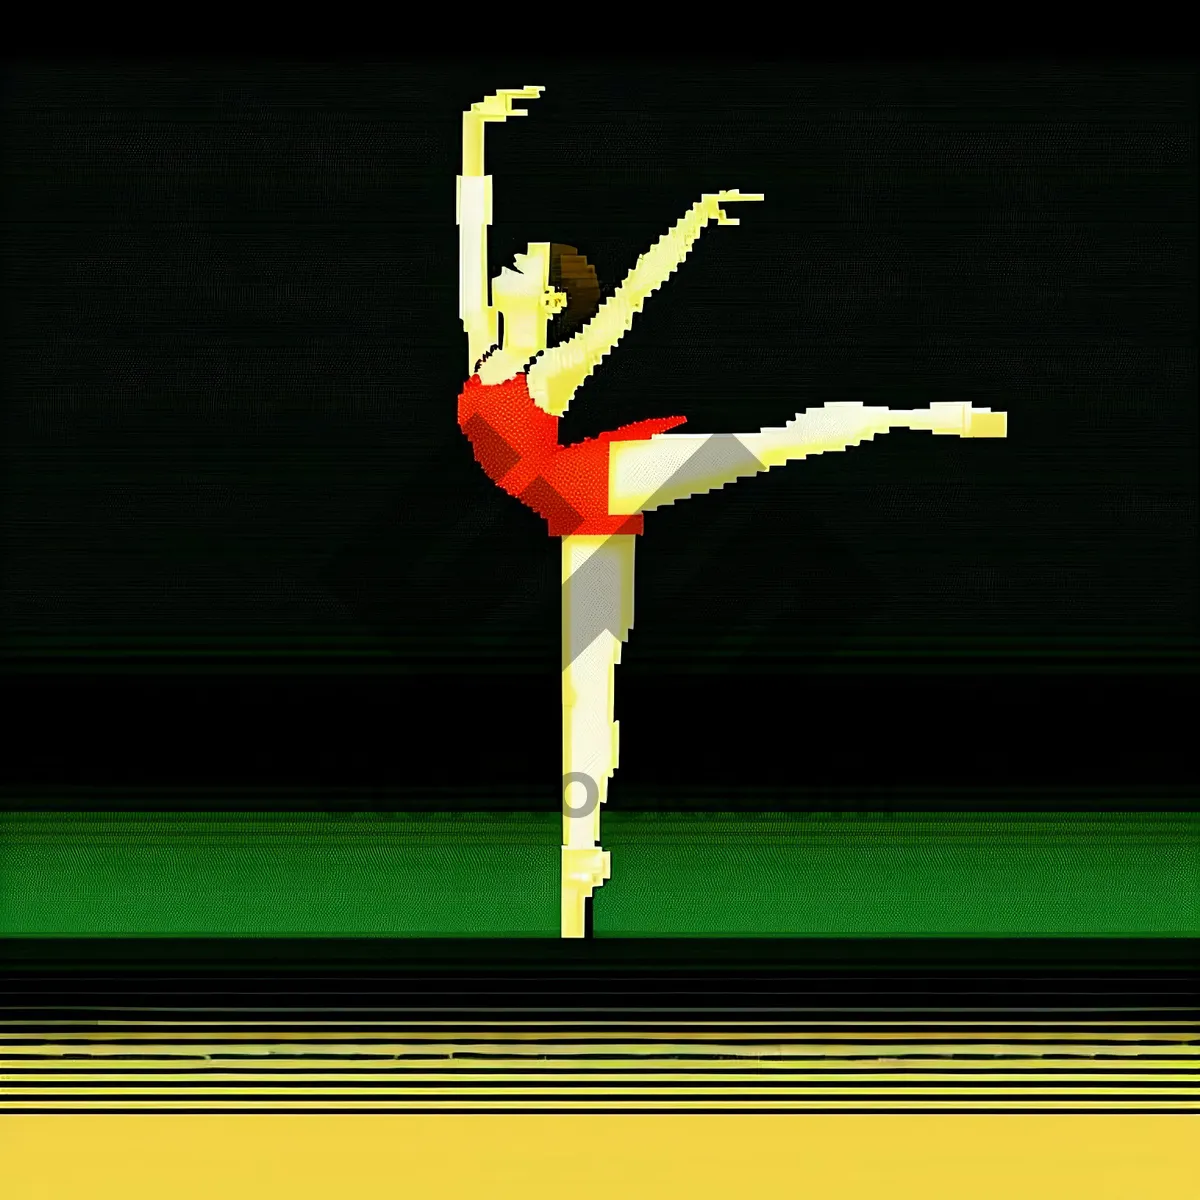 Picture of Dynamic Acrobatic Performance on Gymnastic Apparatus